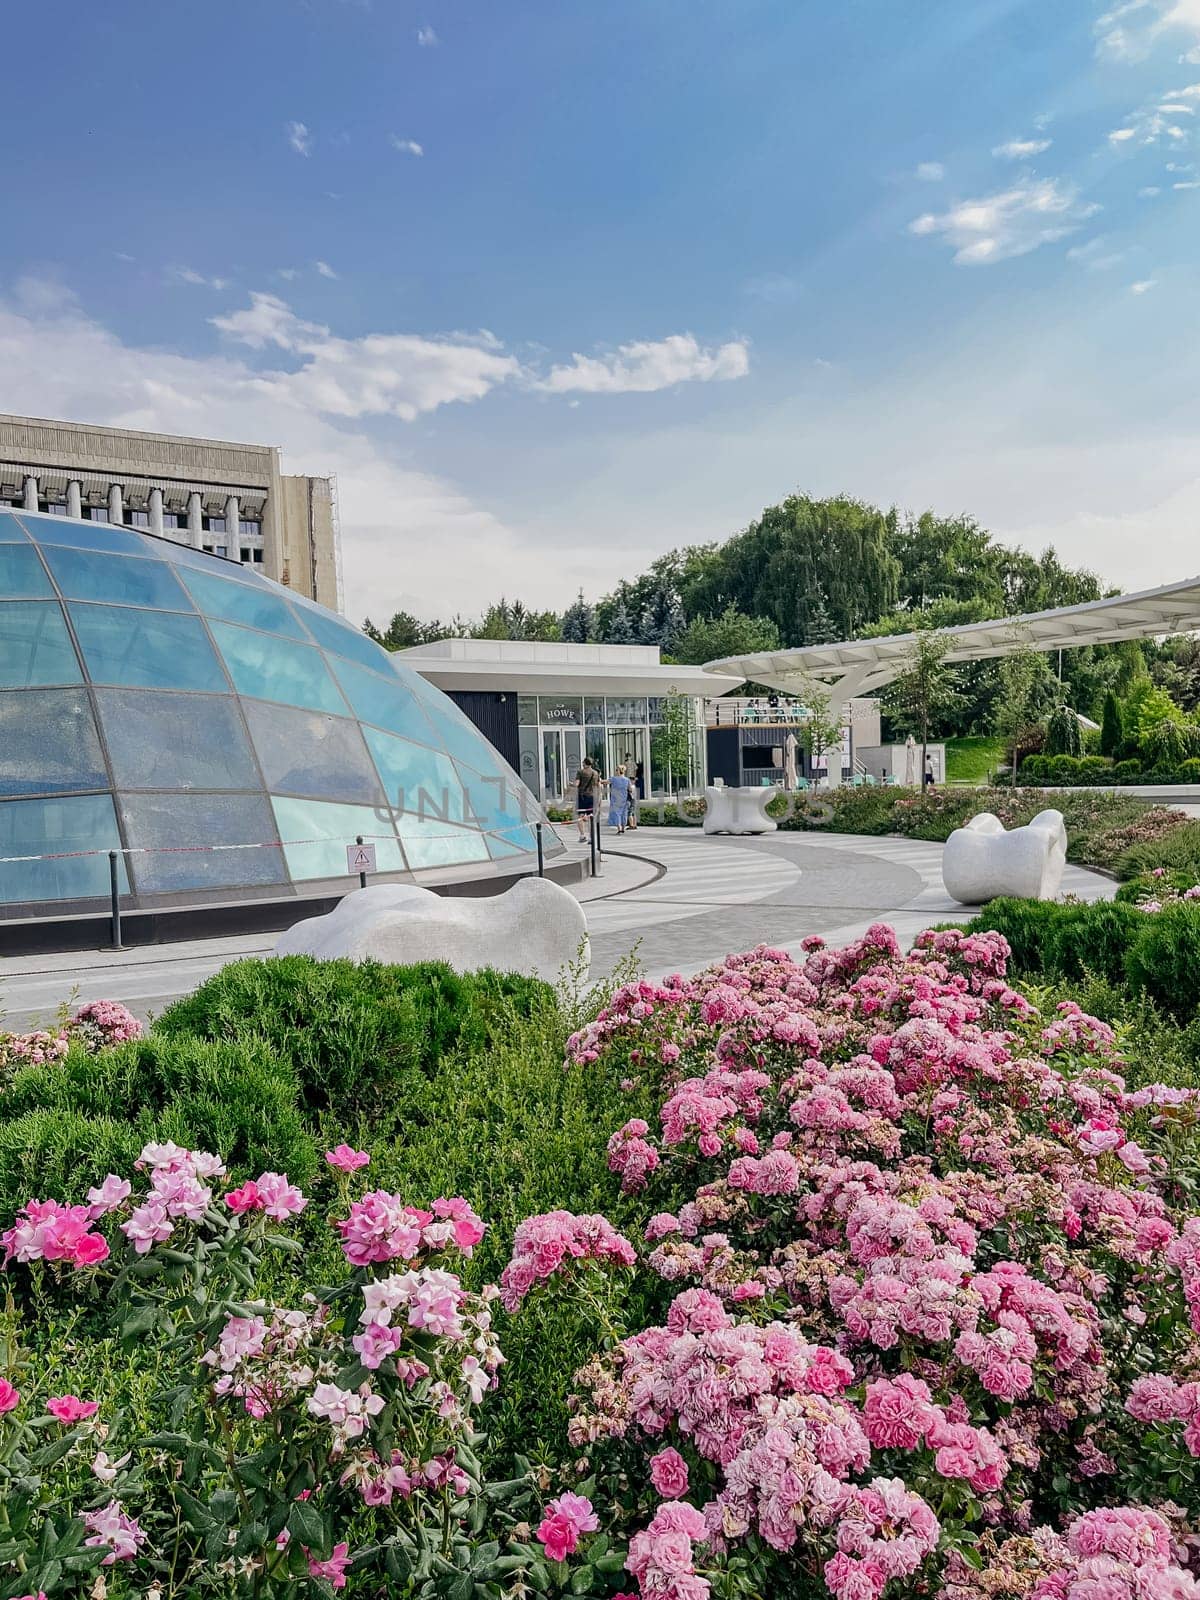 Architectural building with a large glass dome, surrounded by a colorful flower garden. Clear blue sky with fluffy white clouds overhead.